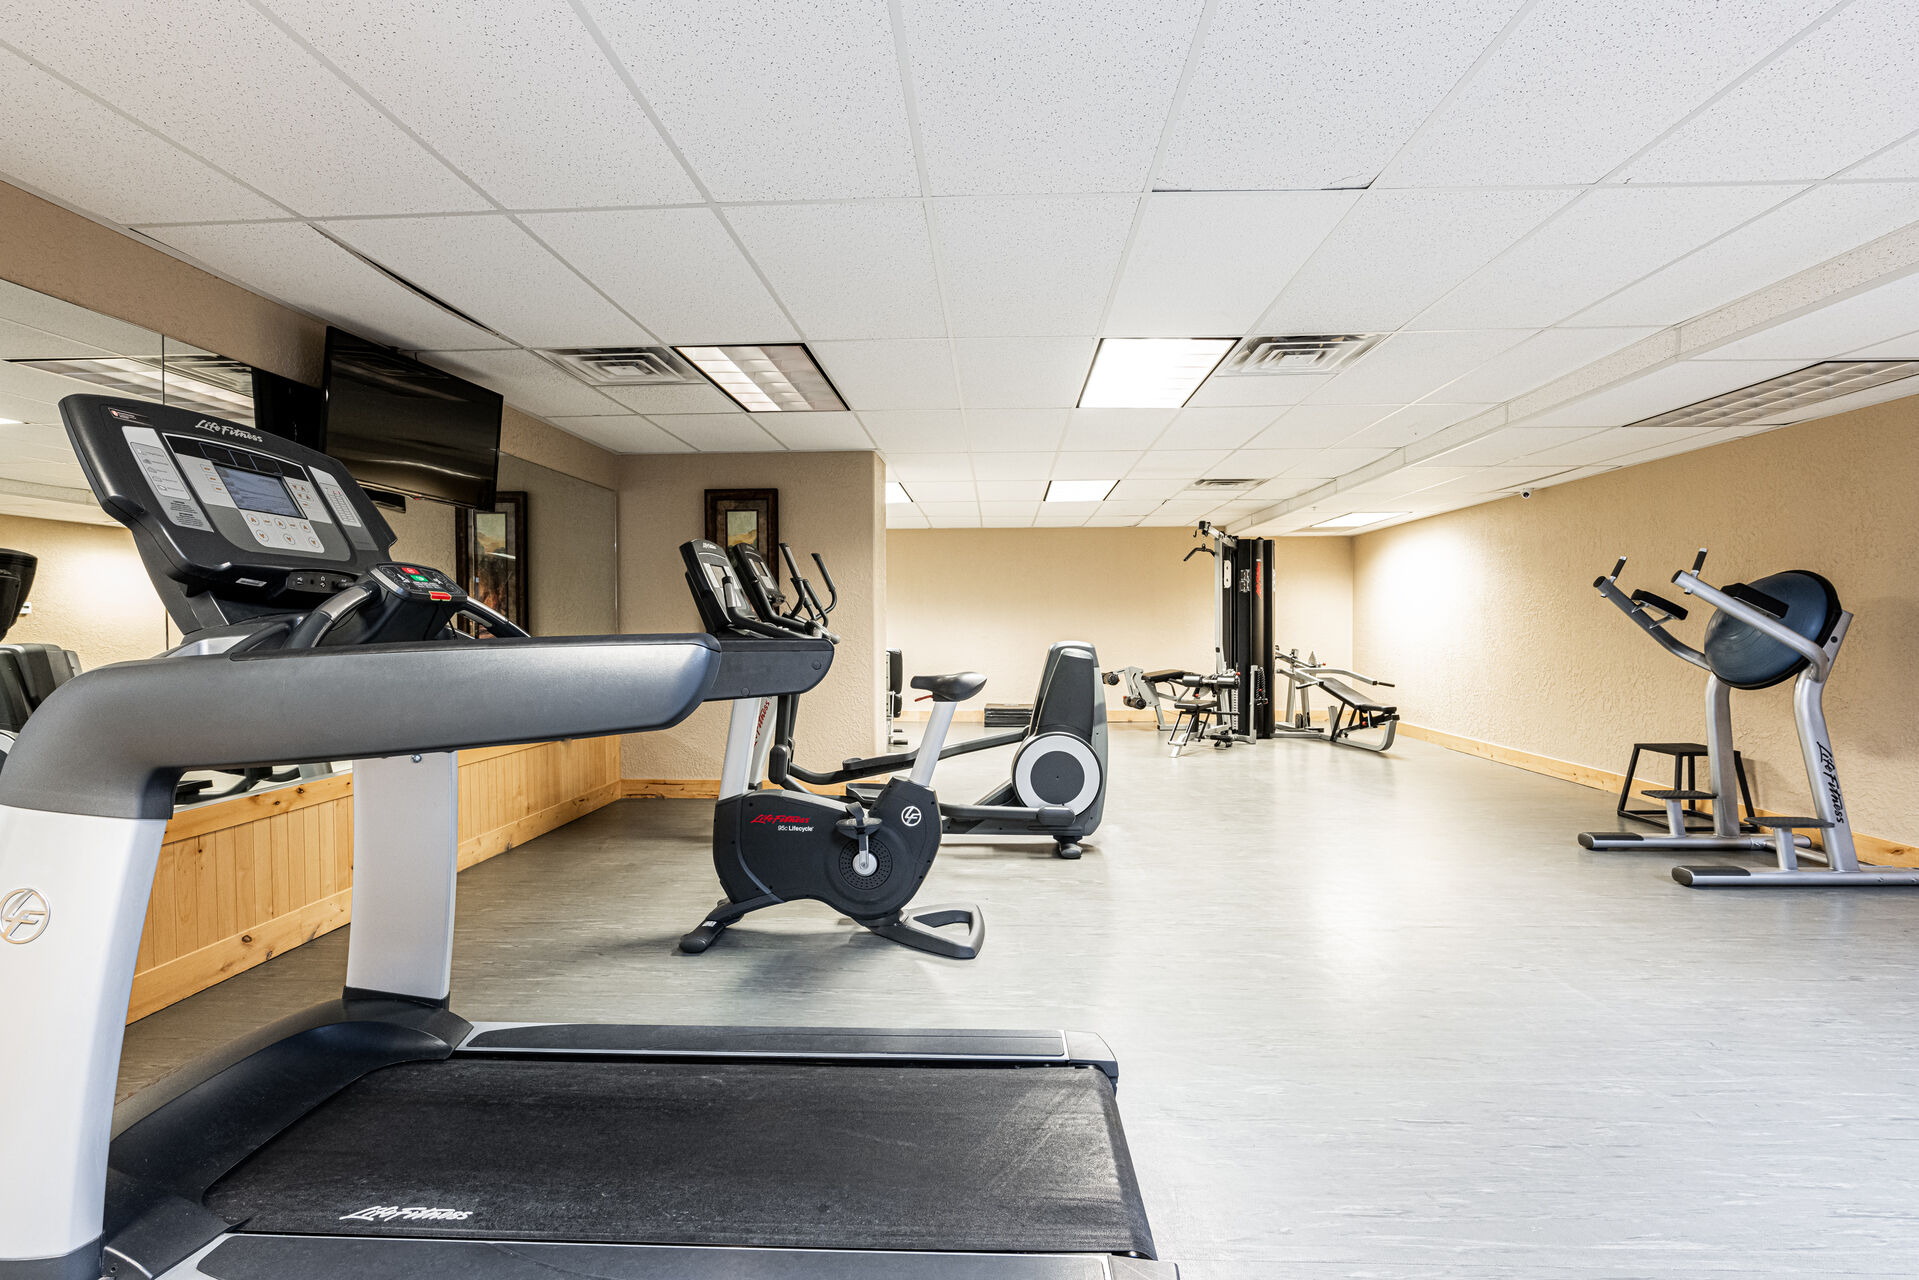 Take advantage of a large variety of fitness equipment